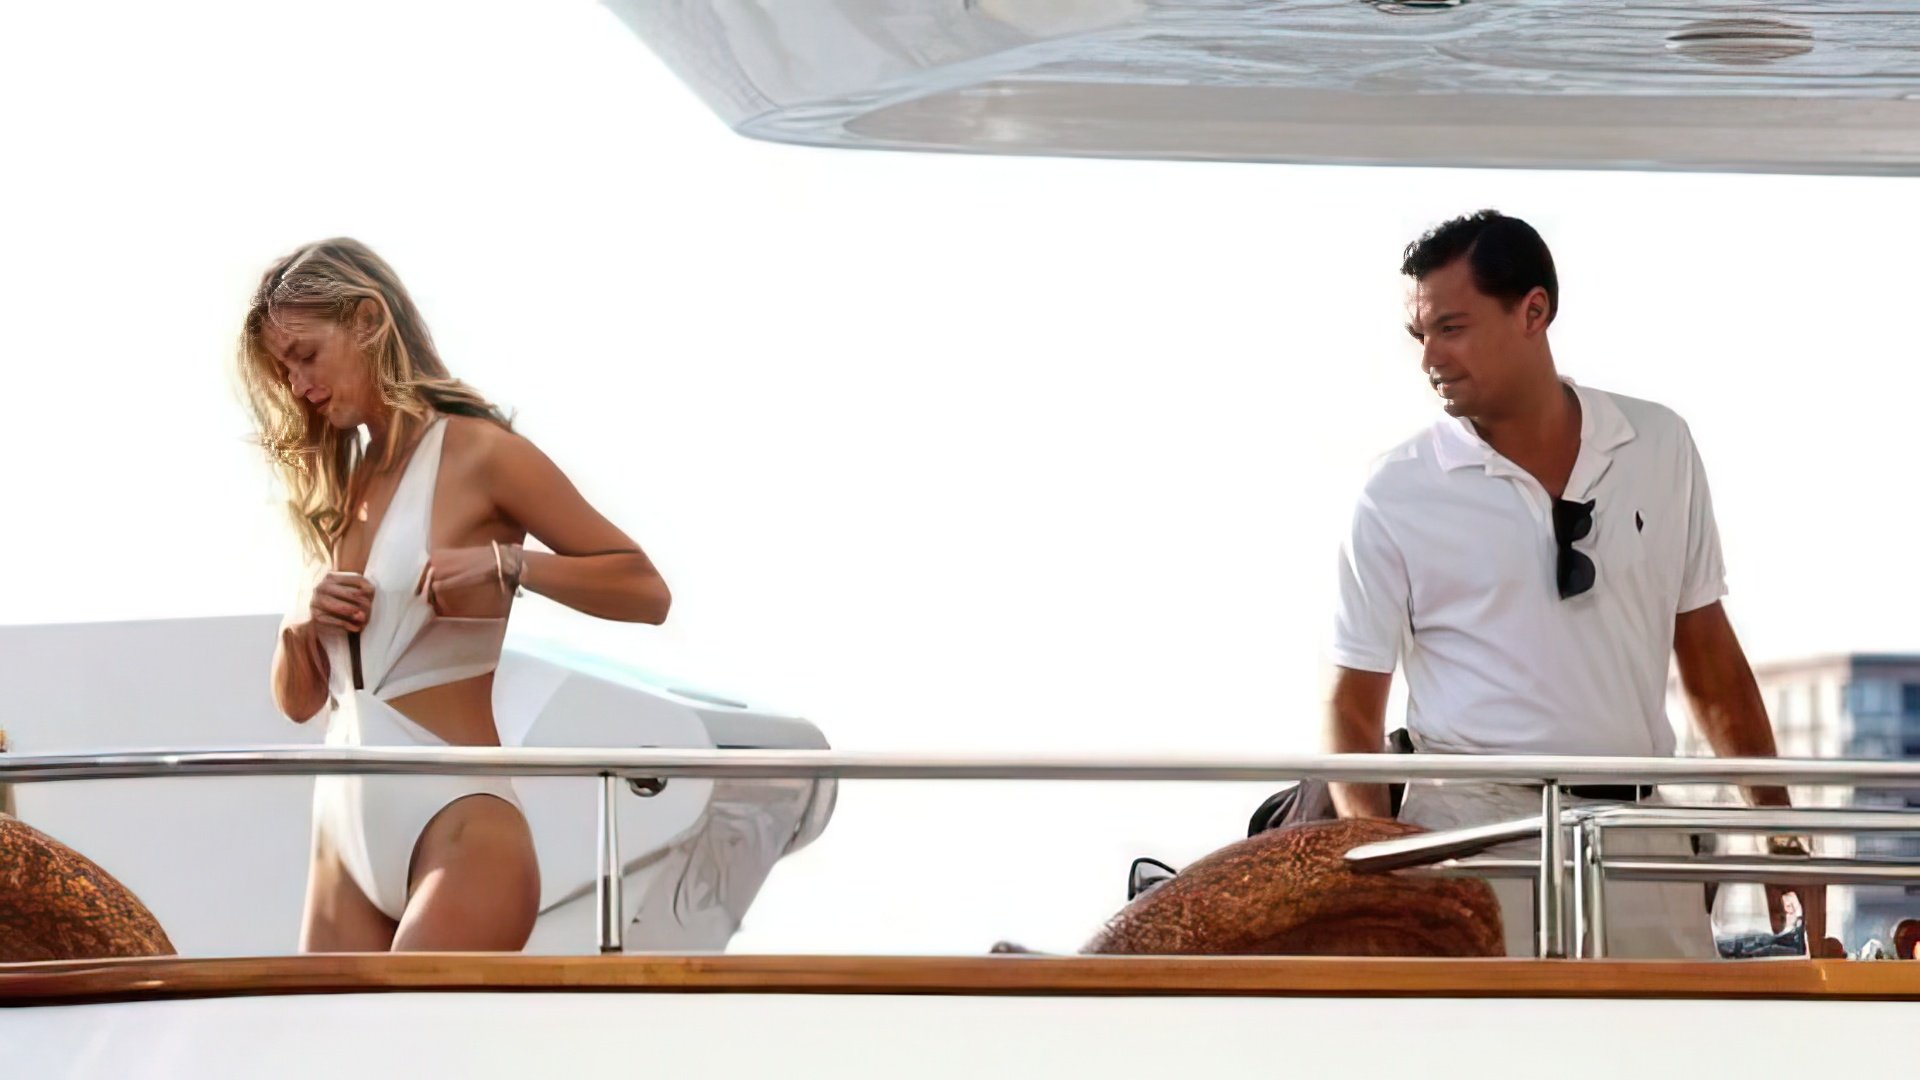 Dicapri and Robbie chilling on yacht together